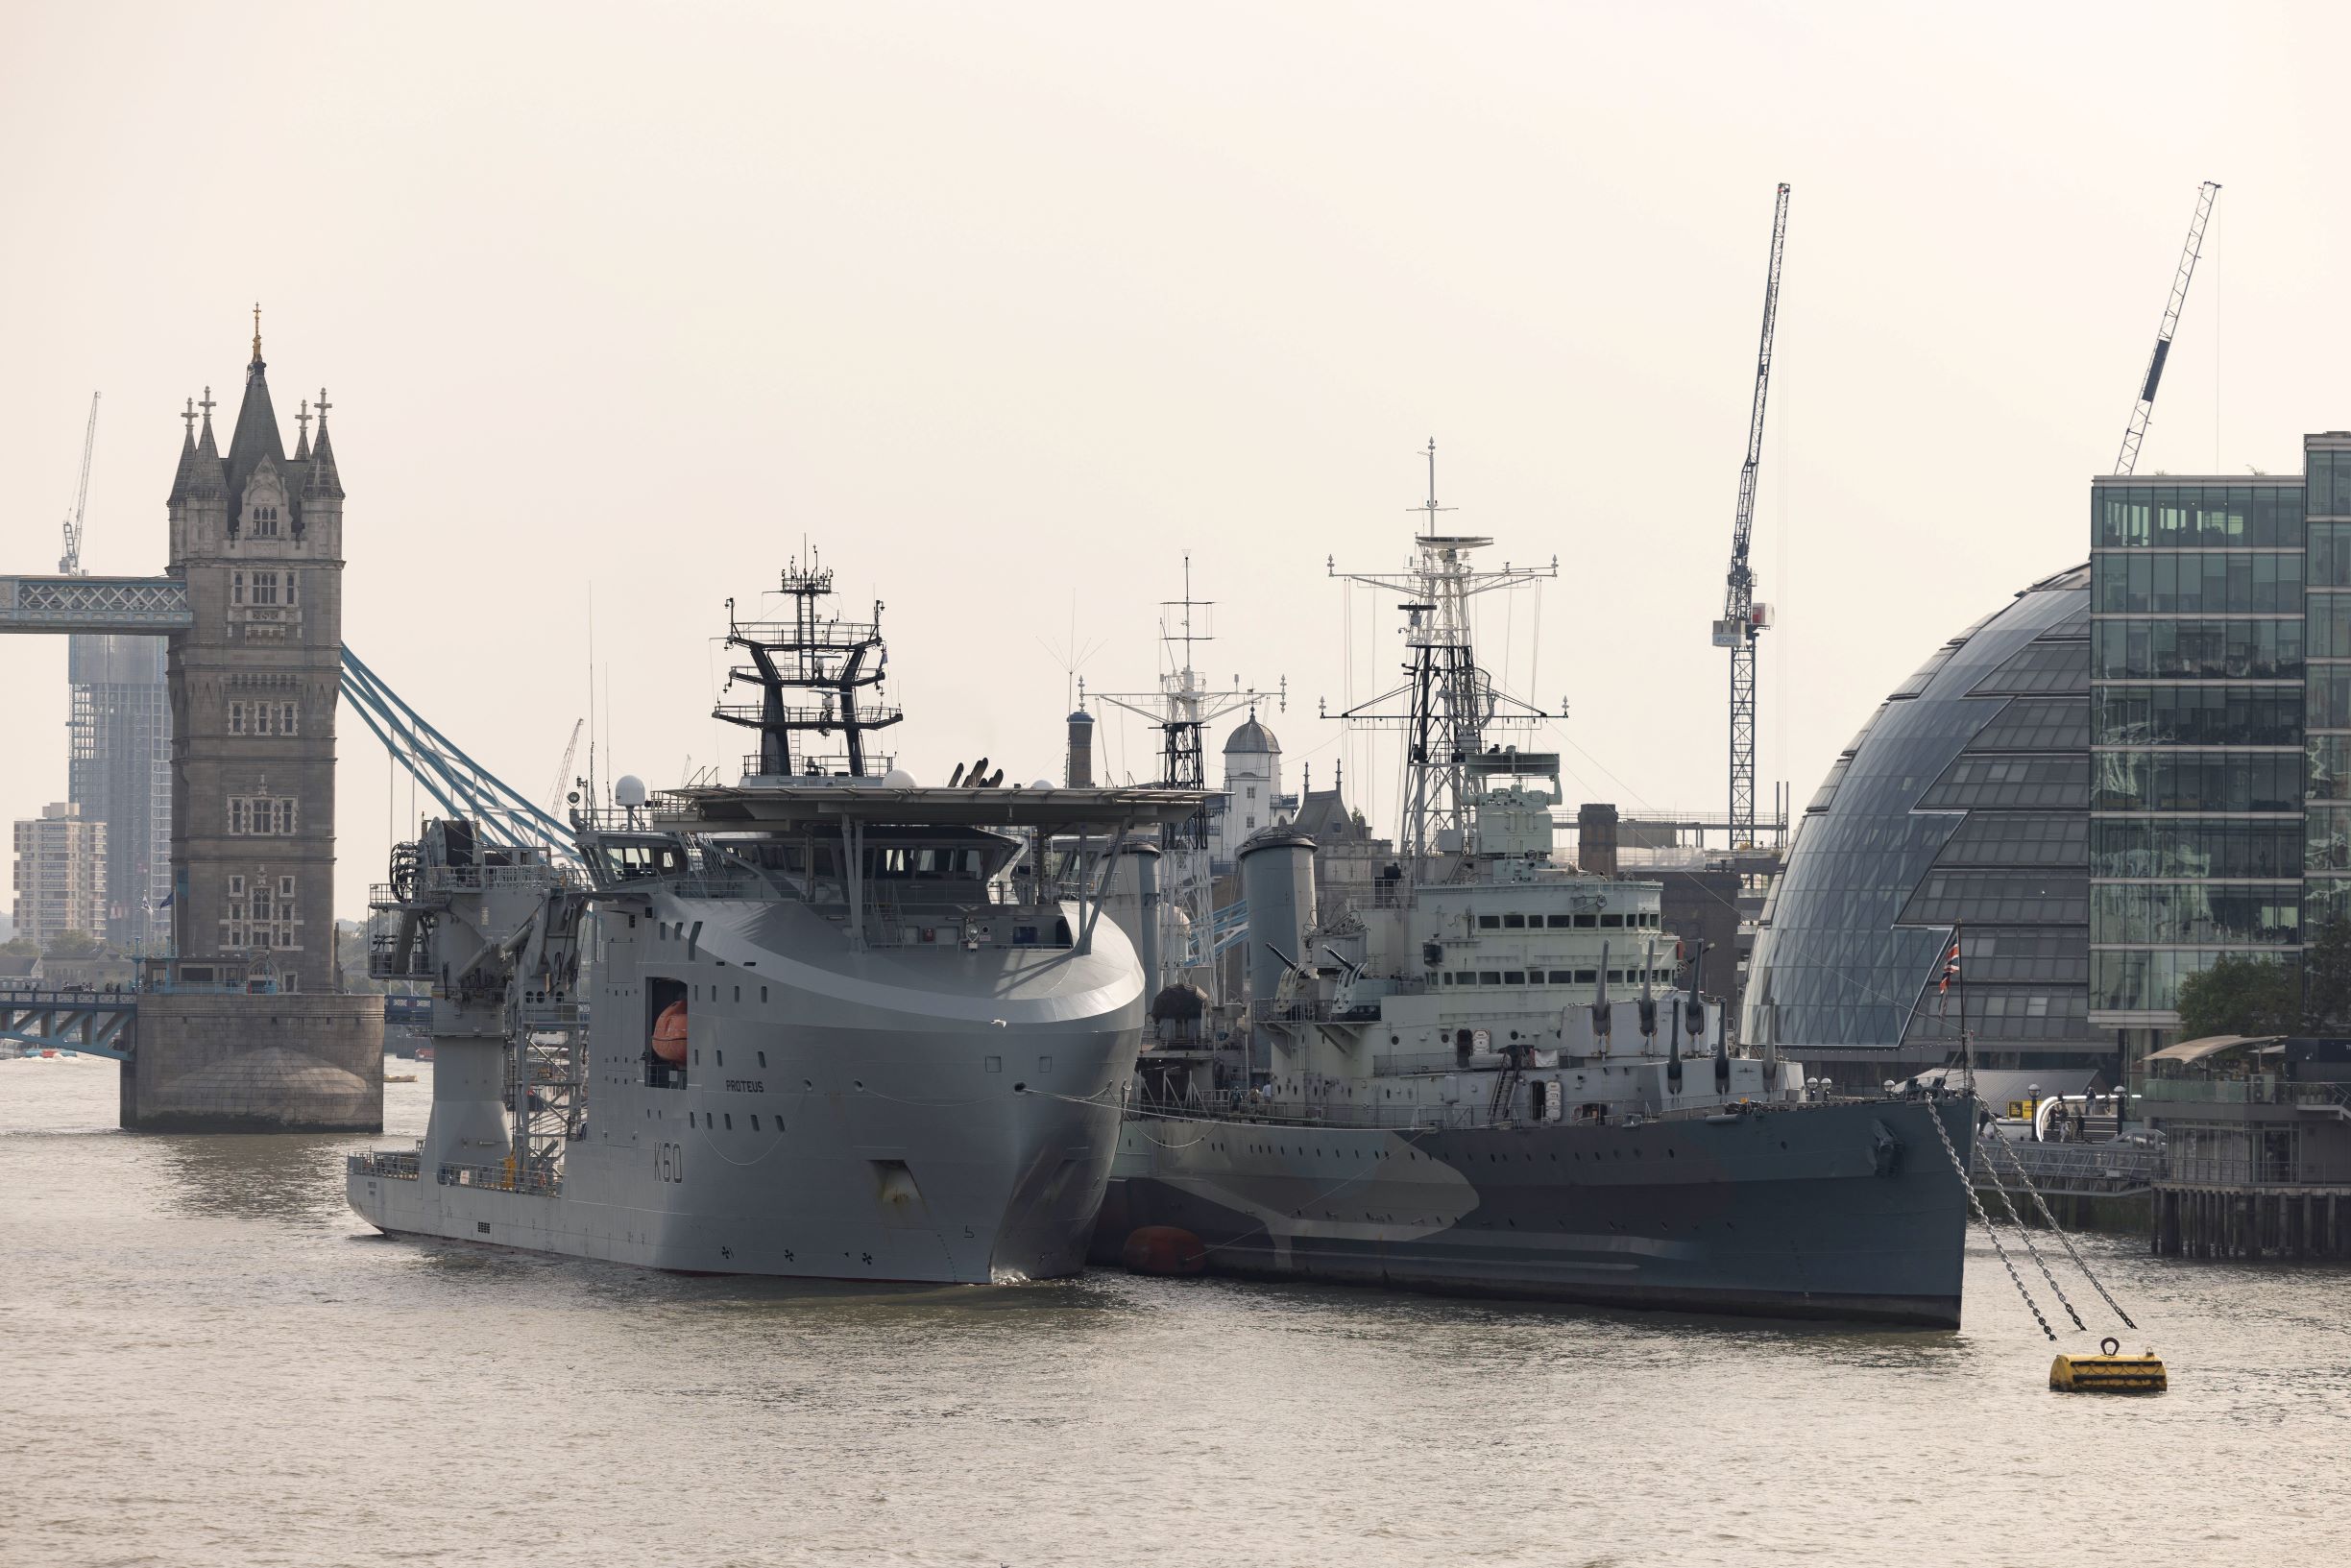 RFA Proteus and RFA Stirling Castle on the River Thames